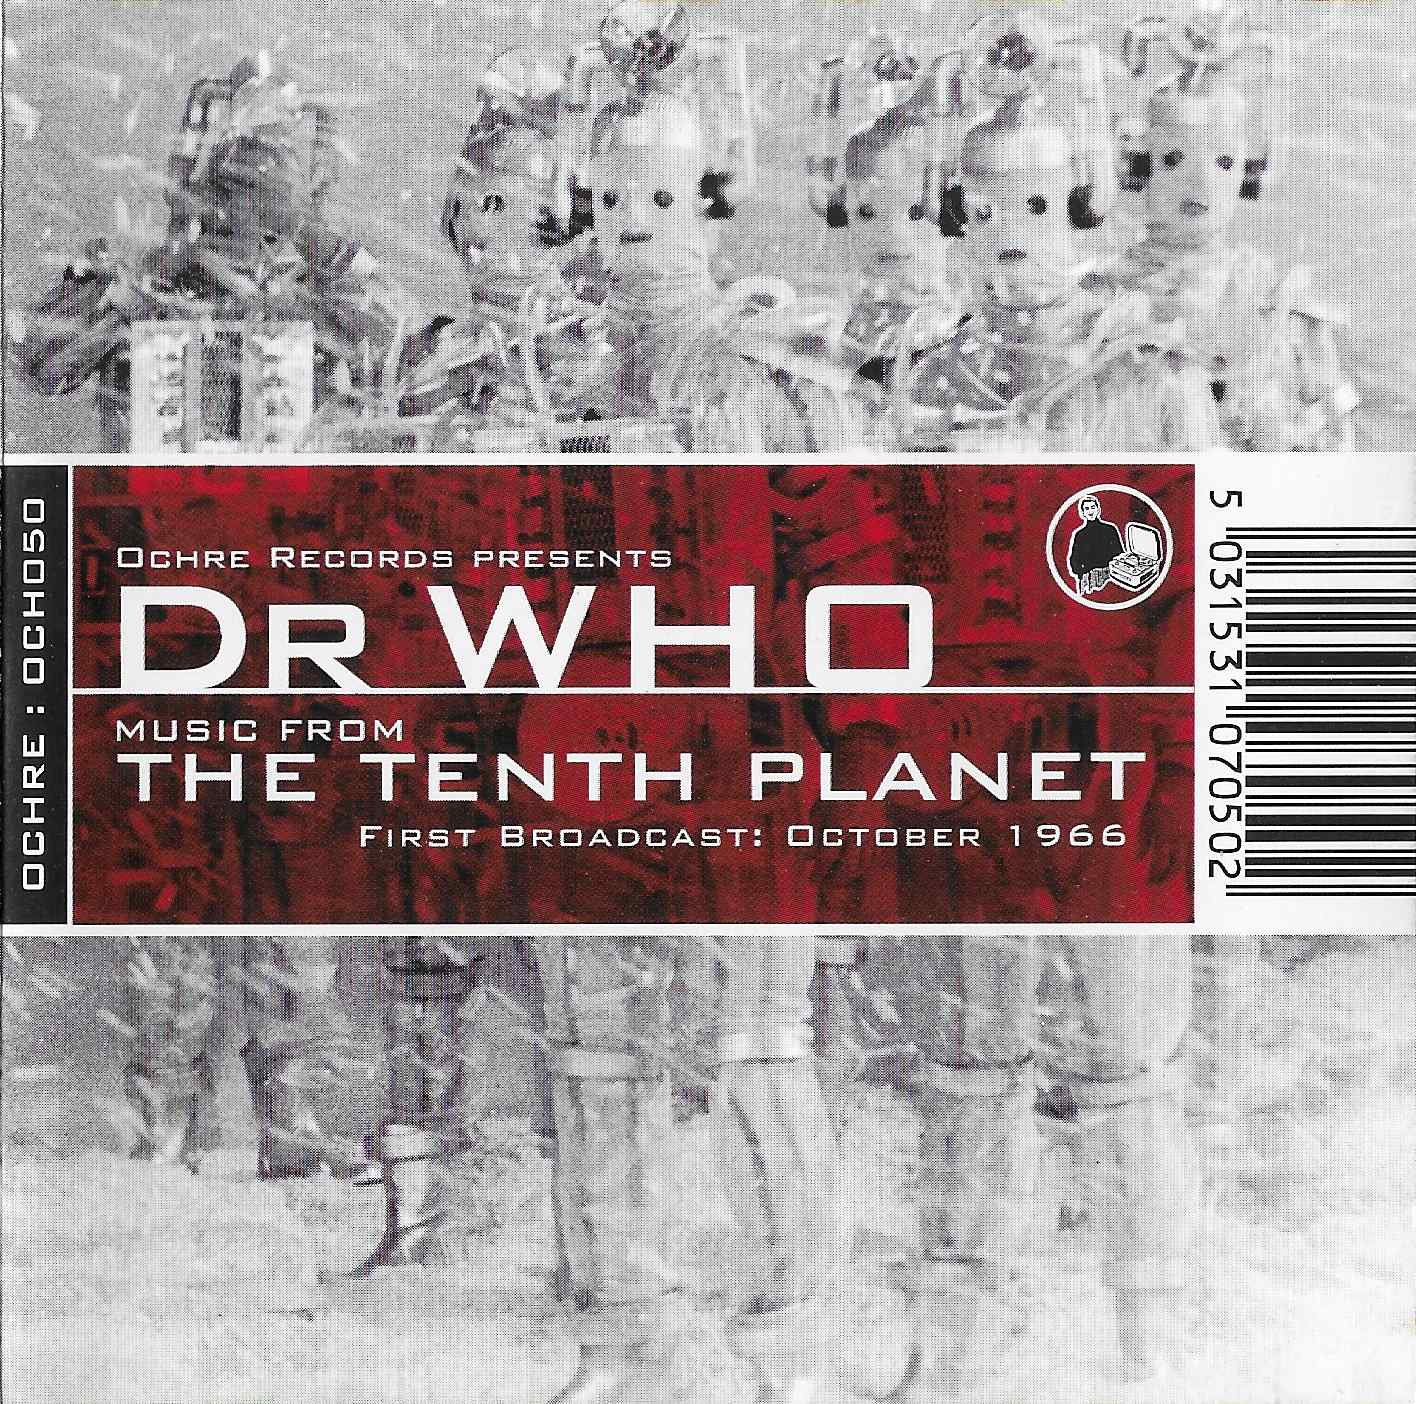 Picture of Doctor Who - Music from The Tenth Planet by artist Roger Roger / Walter Stott / Douglas Gamley / Martin Slavin / Dennis Farnon from the BBC cds - Records and Tapes library